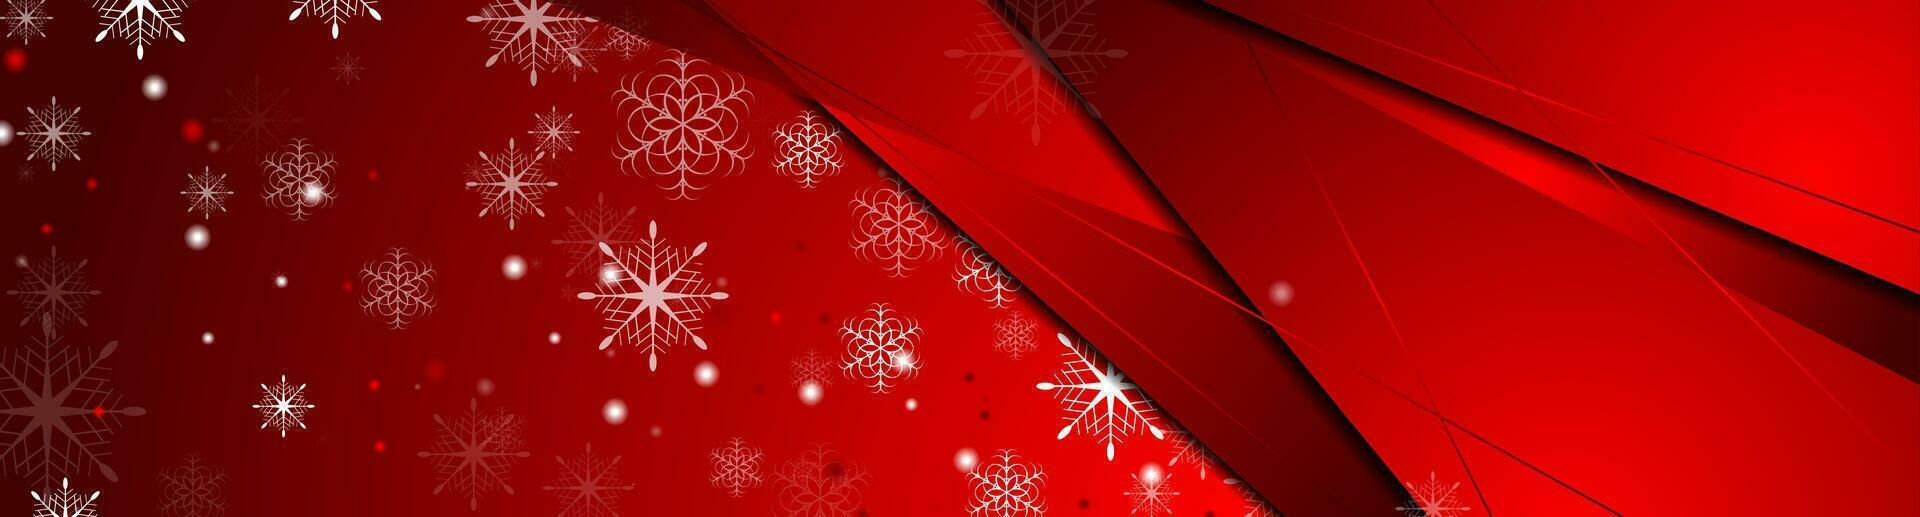 Red abstract snowflakes Christmas corporate banner design vector